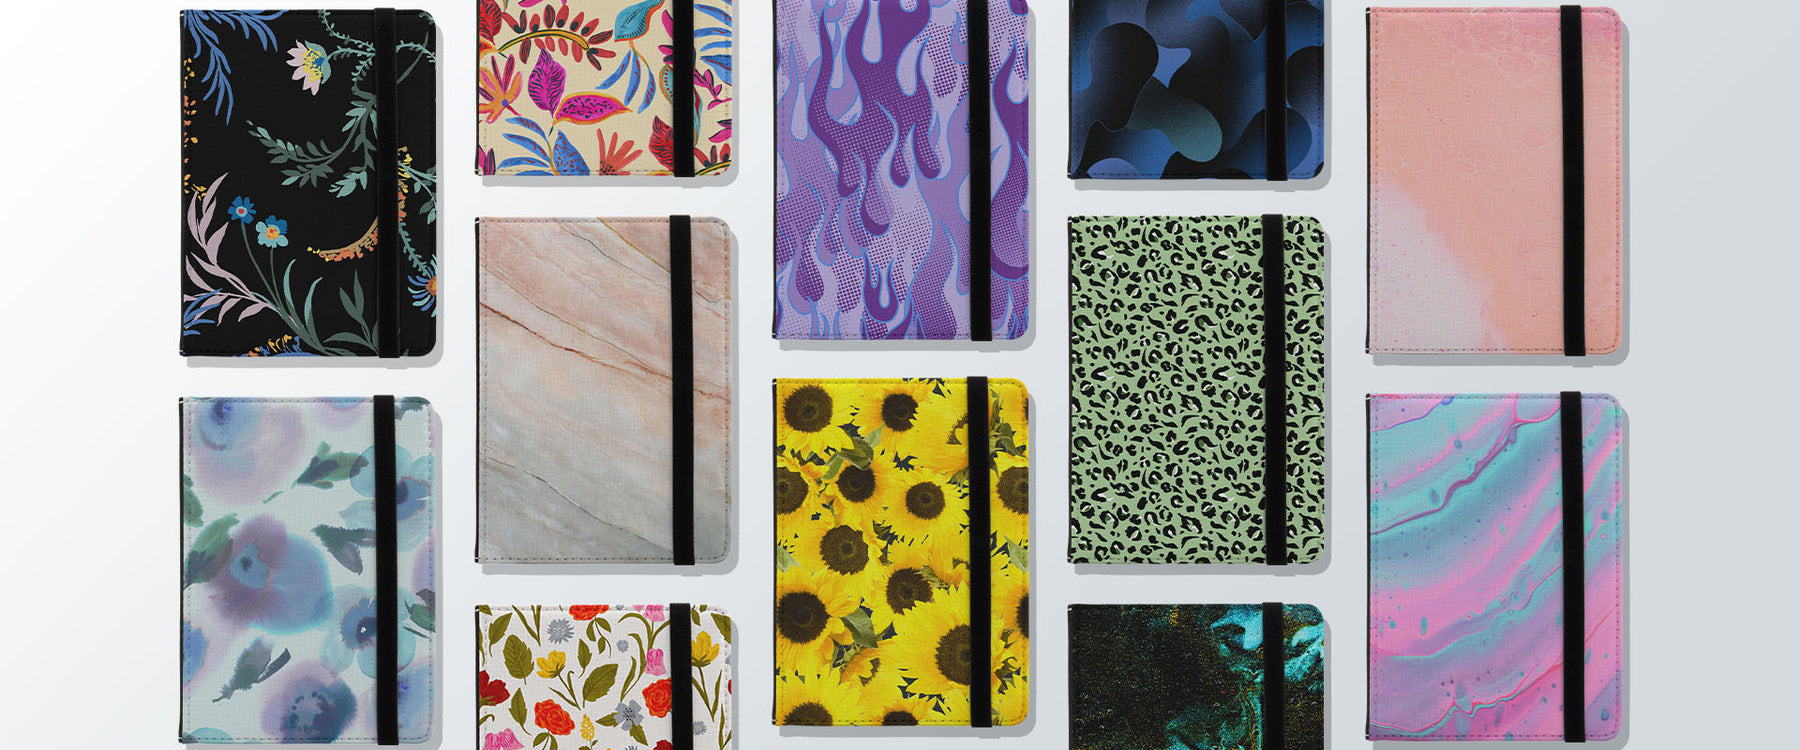 Kindle Cases in many designs